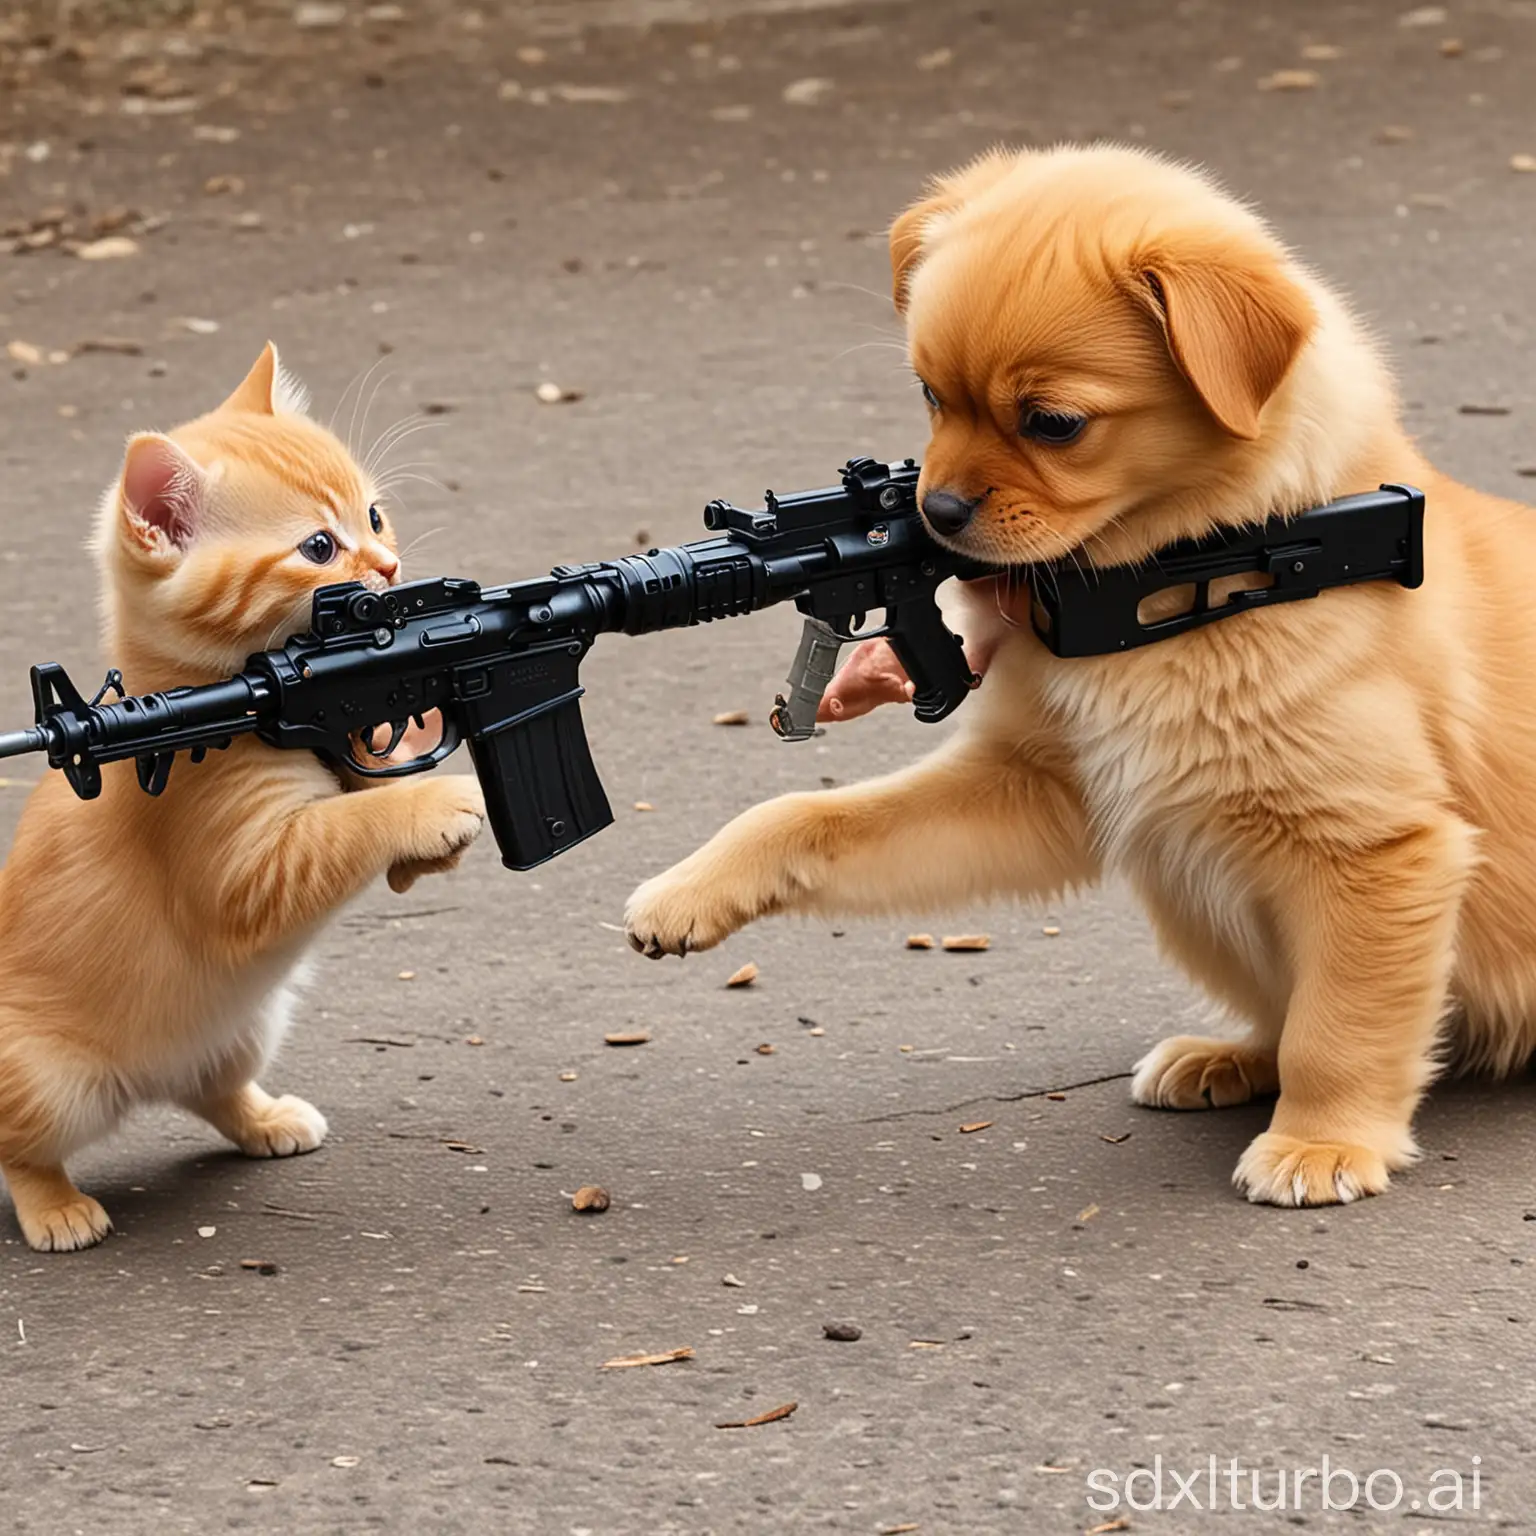 Playful-Little-Dogs-Engage-in-Combat-with-a-Tiny-Kitten-Armed-with-Oversized-Guns